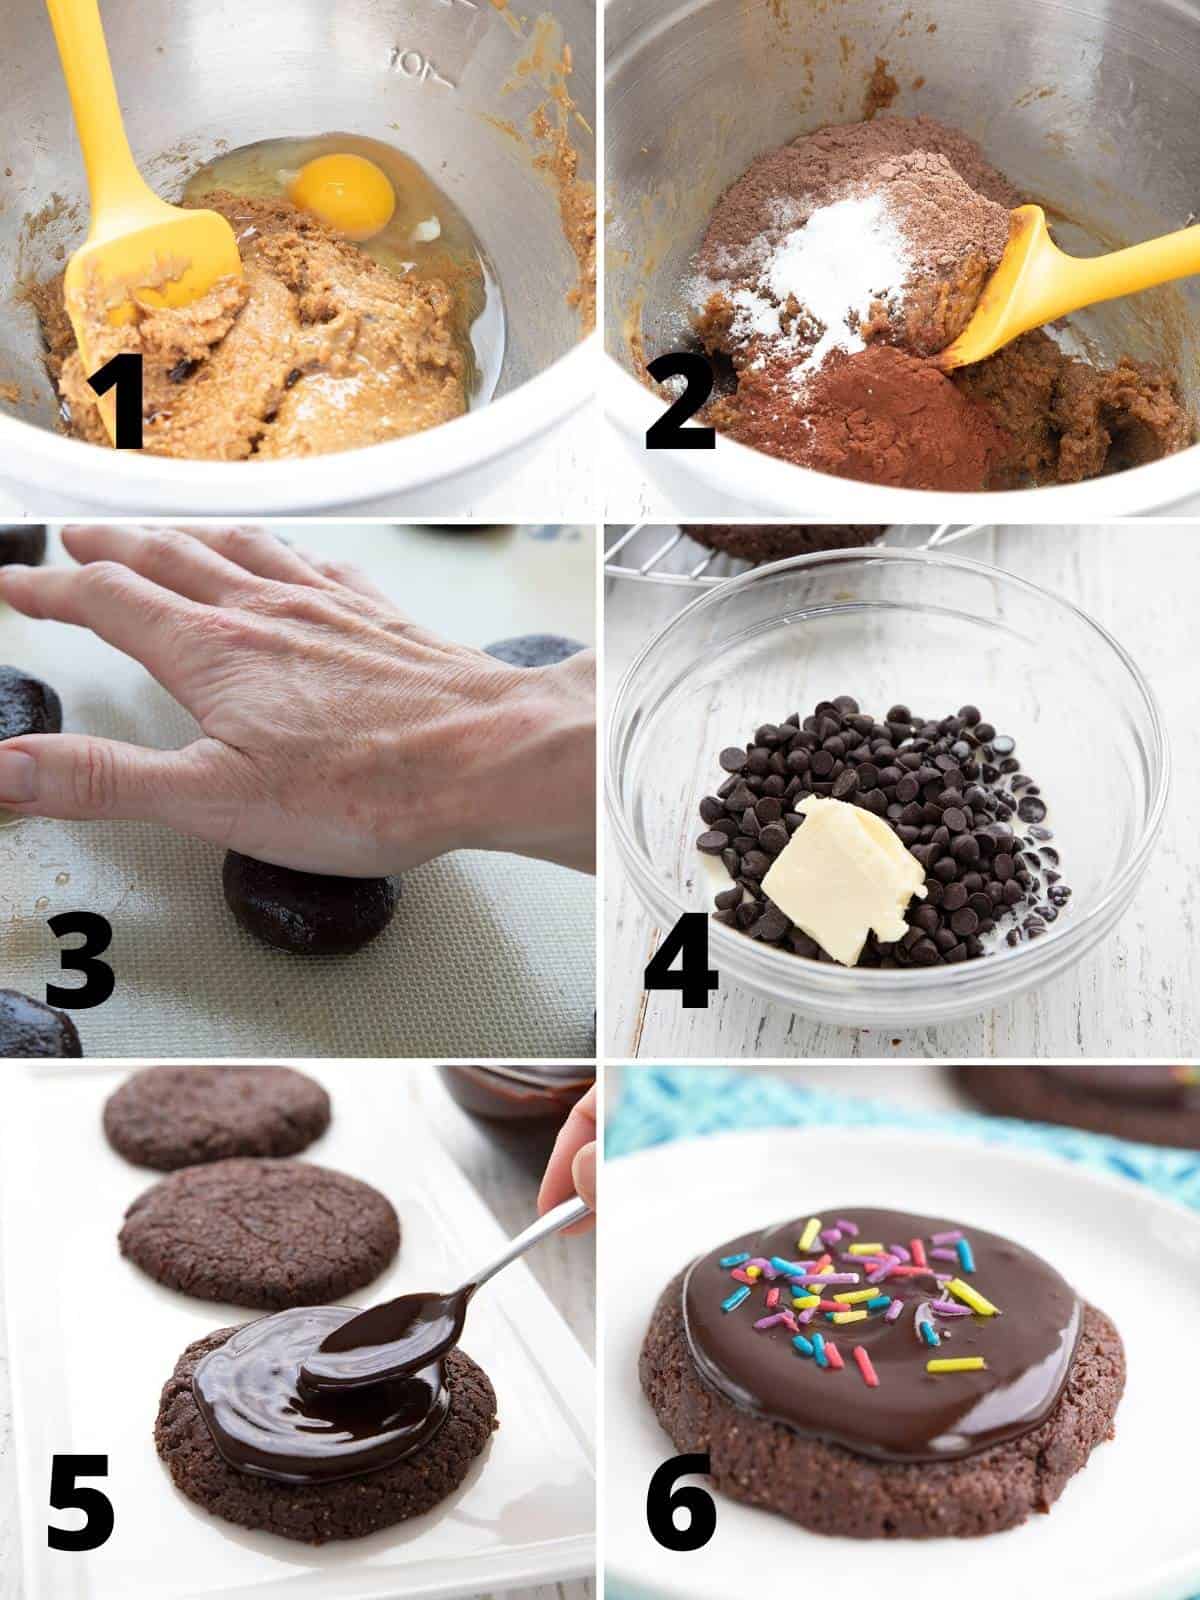 A collage of 6 images showing how to make Keto Chocolate Cookies.